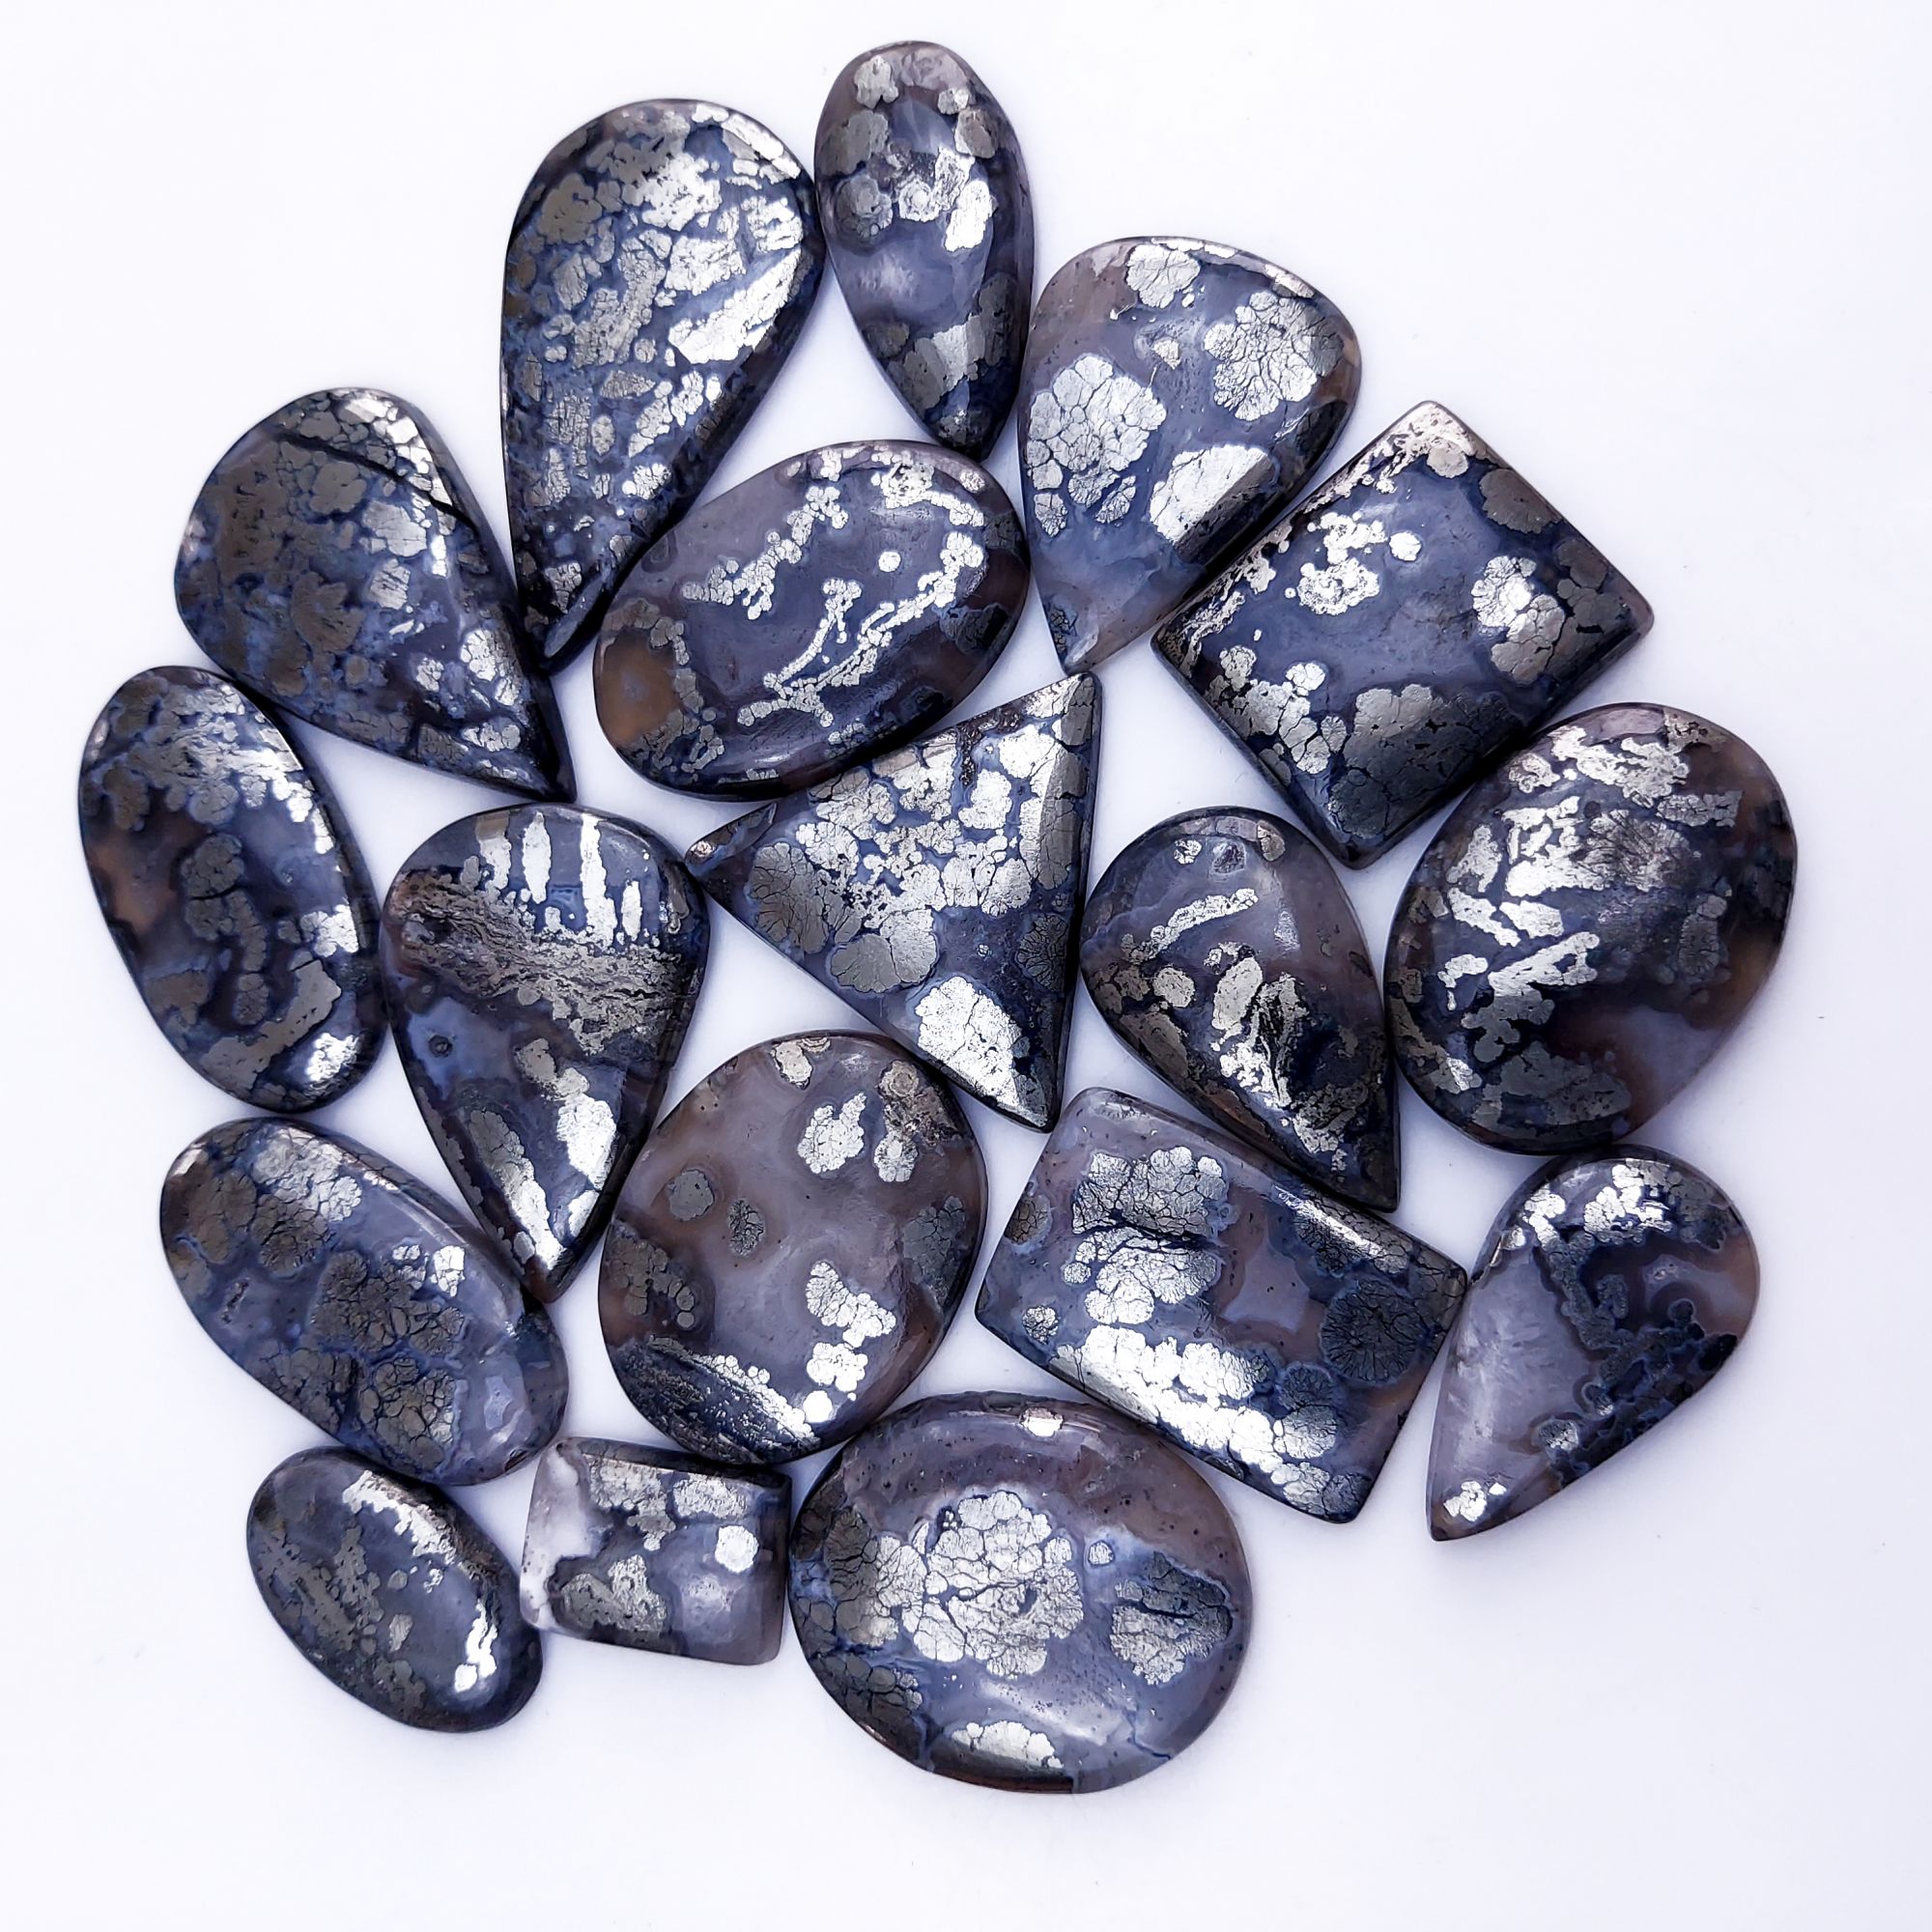 18Pcs 712Cts Natural Marcasite Grey Cabochon Back Side Unpolished Gemstone Semi-Precious Gemstones For Jewelry Making 45x25 20x14mm #10033